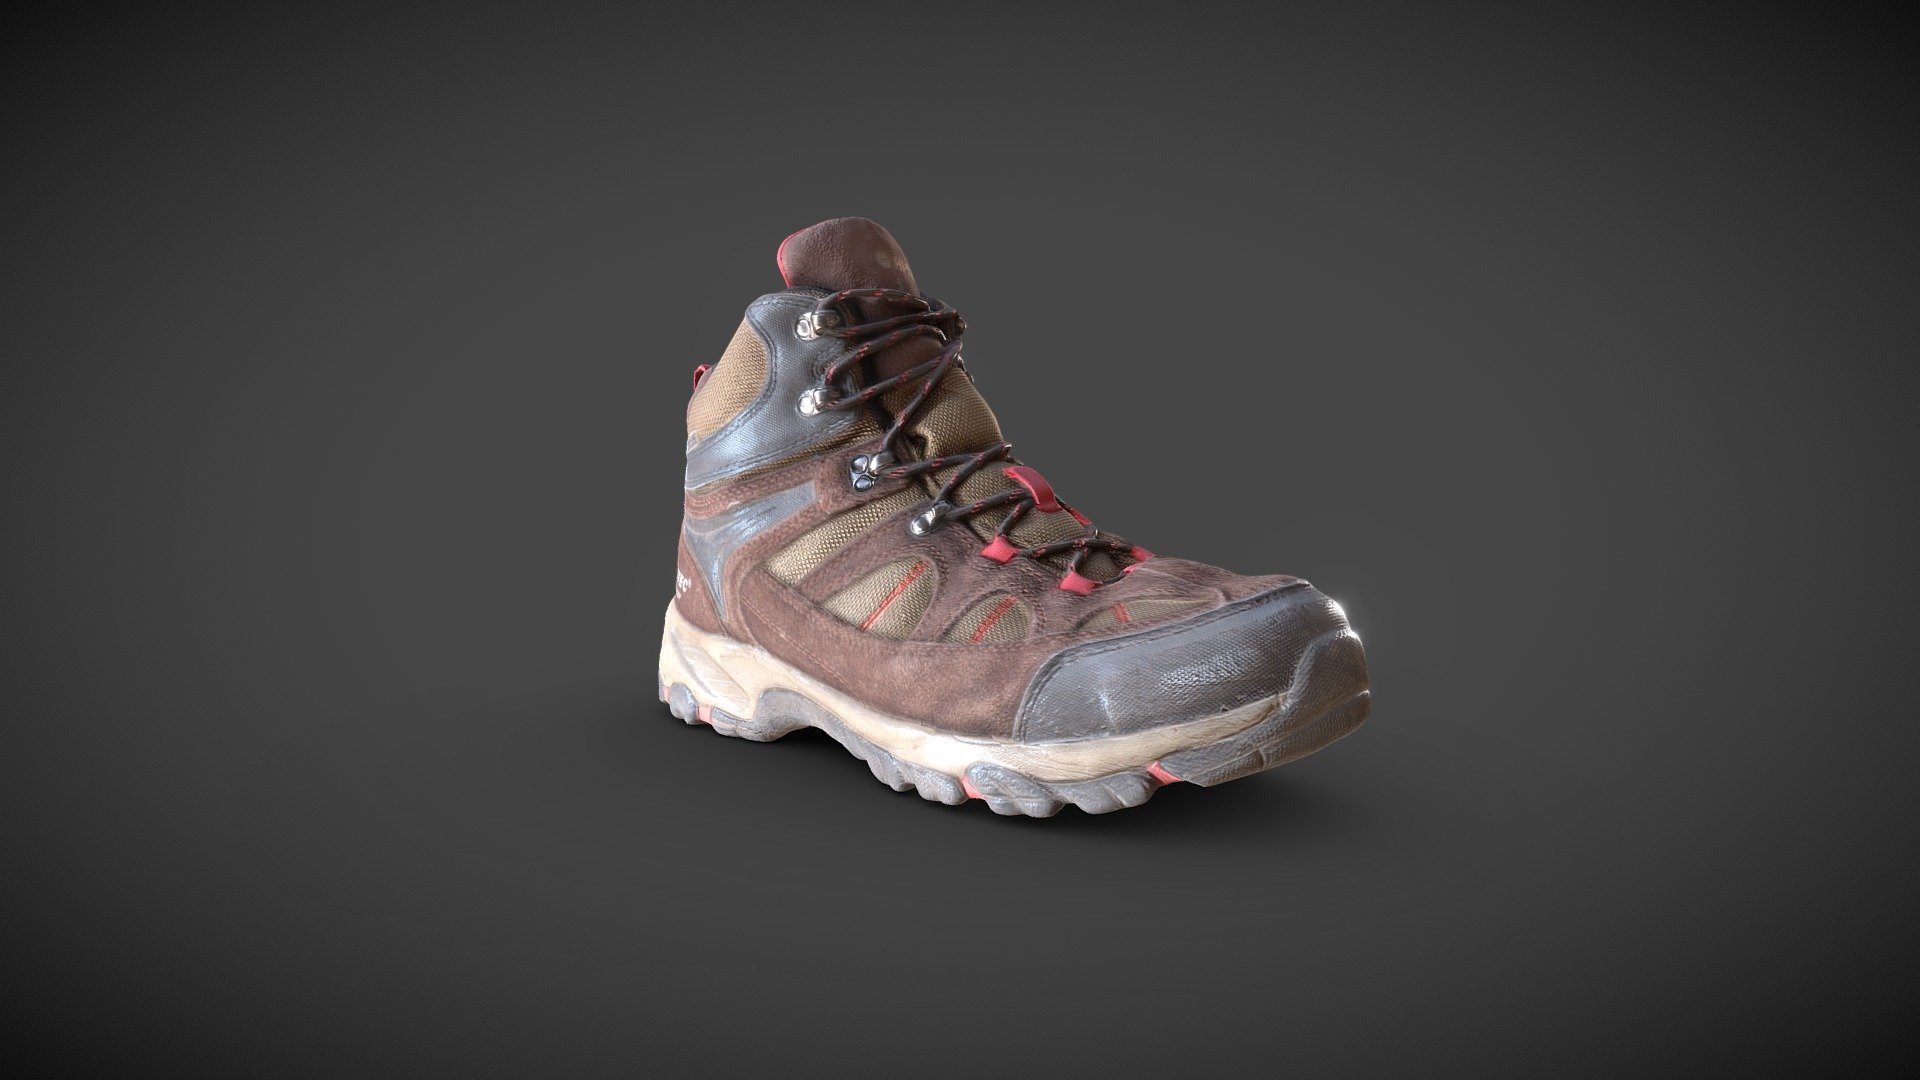 Premium hiking shoe scan and post.
MAPS: Albedo - AO - Normals - Metallic - Rougness - Borcego Premium - Buy Royalty Free 3D model by diegoev 3d model